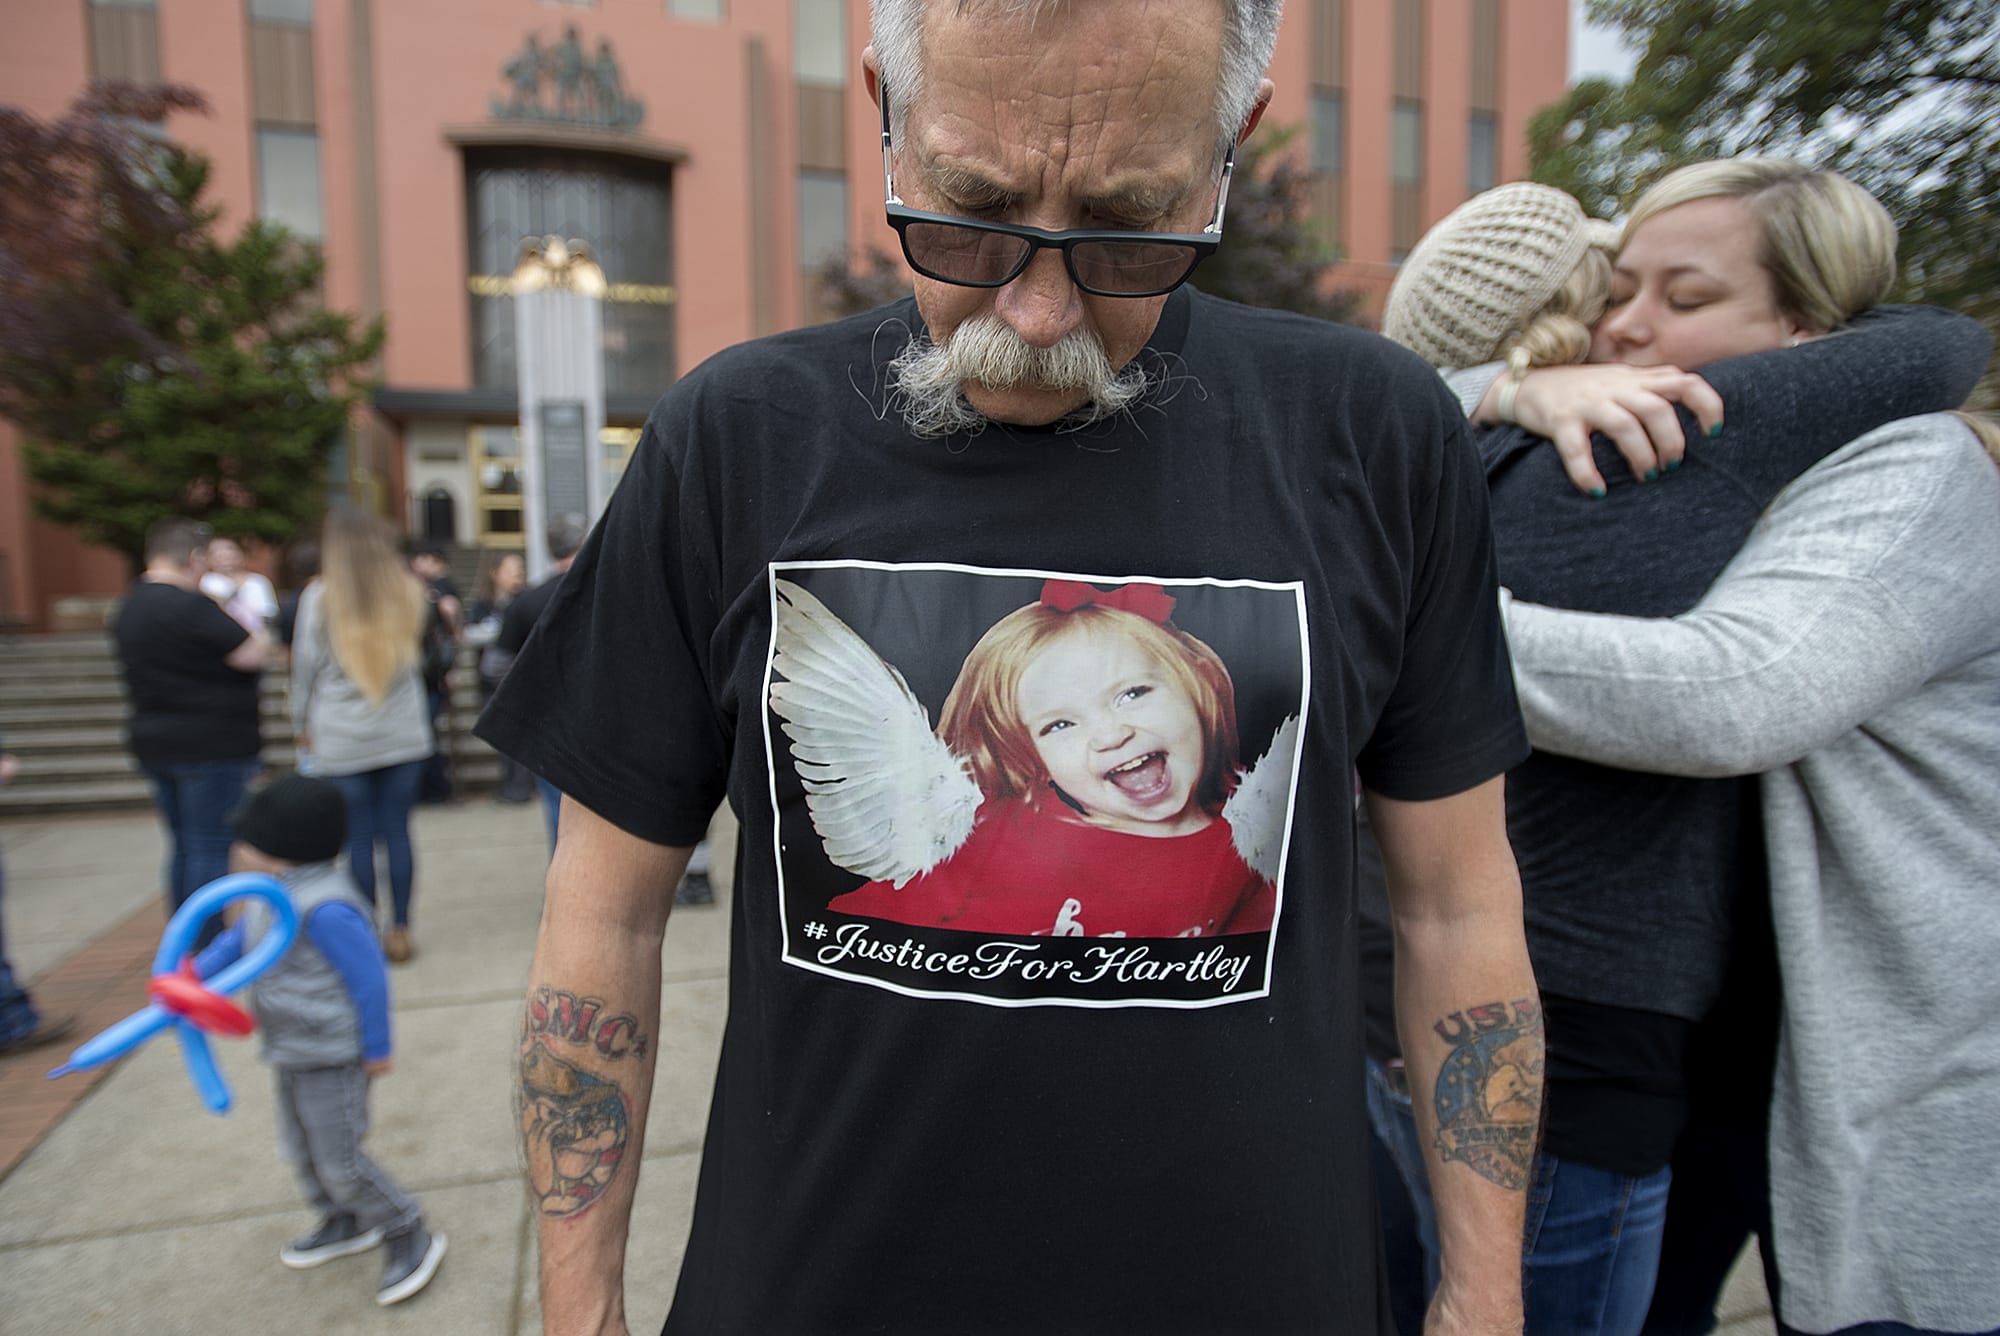 Tim Luchau, grandfather of Hartley Anderson, wears a t-shirt in her honor as loved ones gather on the steps at the Clark County Courthouse following the first appearance of Ryan M. Burge on Monday morning, Nov. 5, 2018.